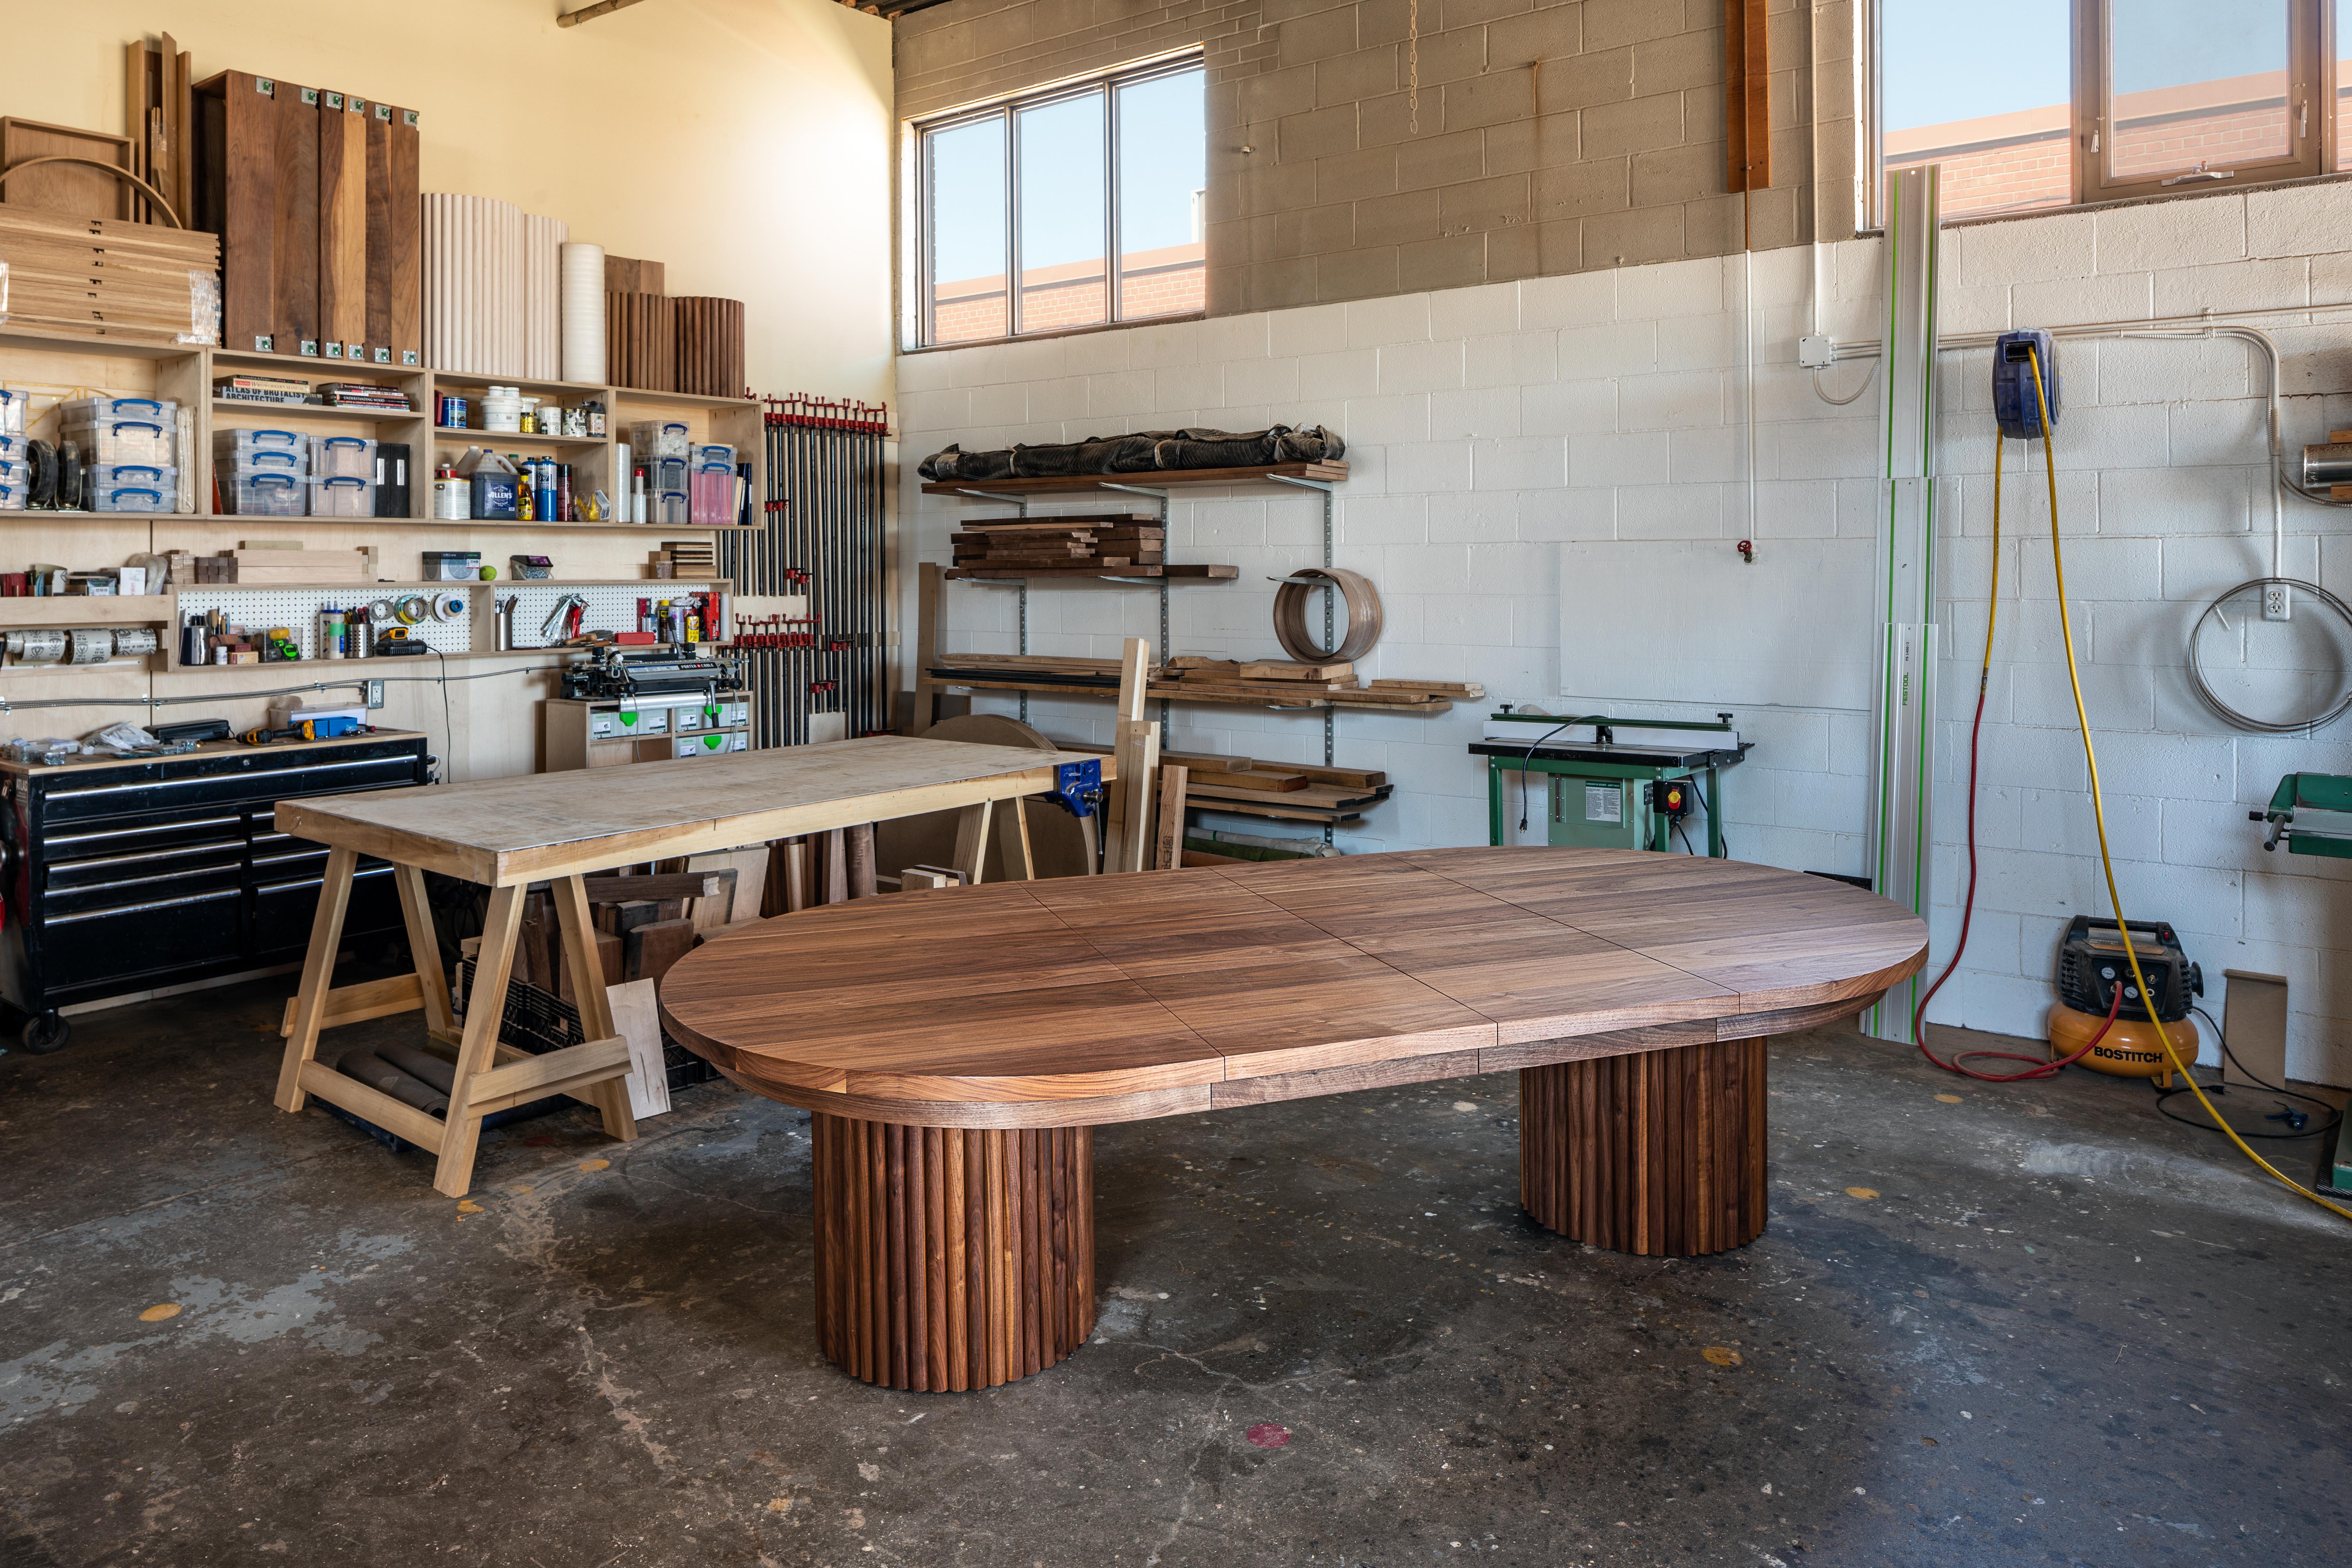 Unapologetically bold, Kate Duncan's Dining Table is a statement piece that pays homage to both a contemporary aesthetic as well as brutalist architecture. Columns of coopered splines and a hefty solid wood top create a table you just can’t miss.